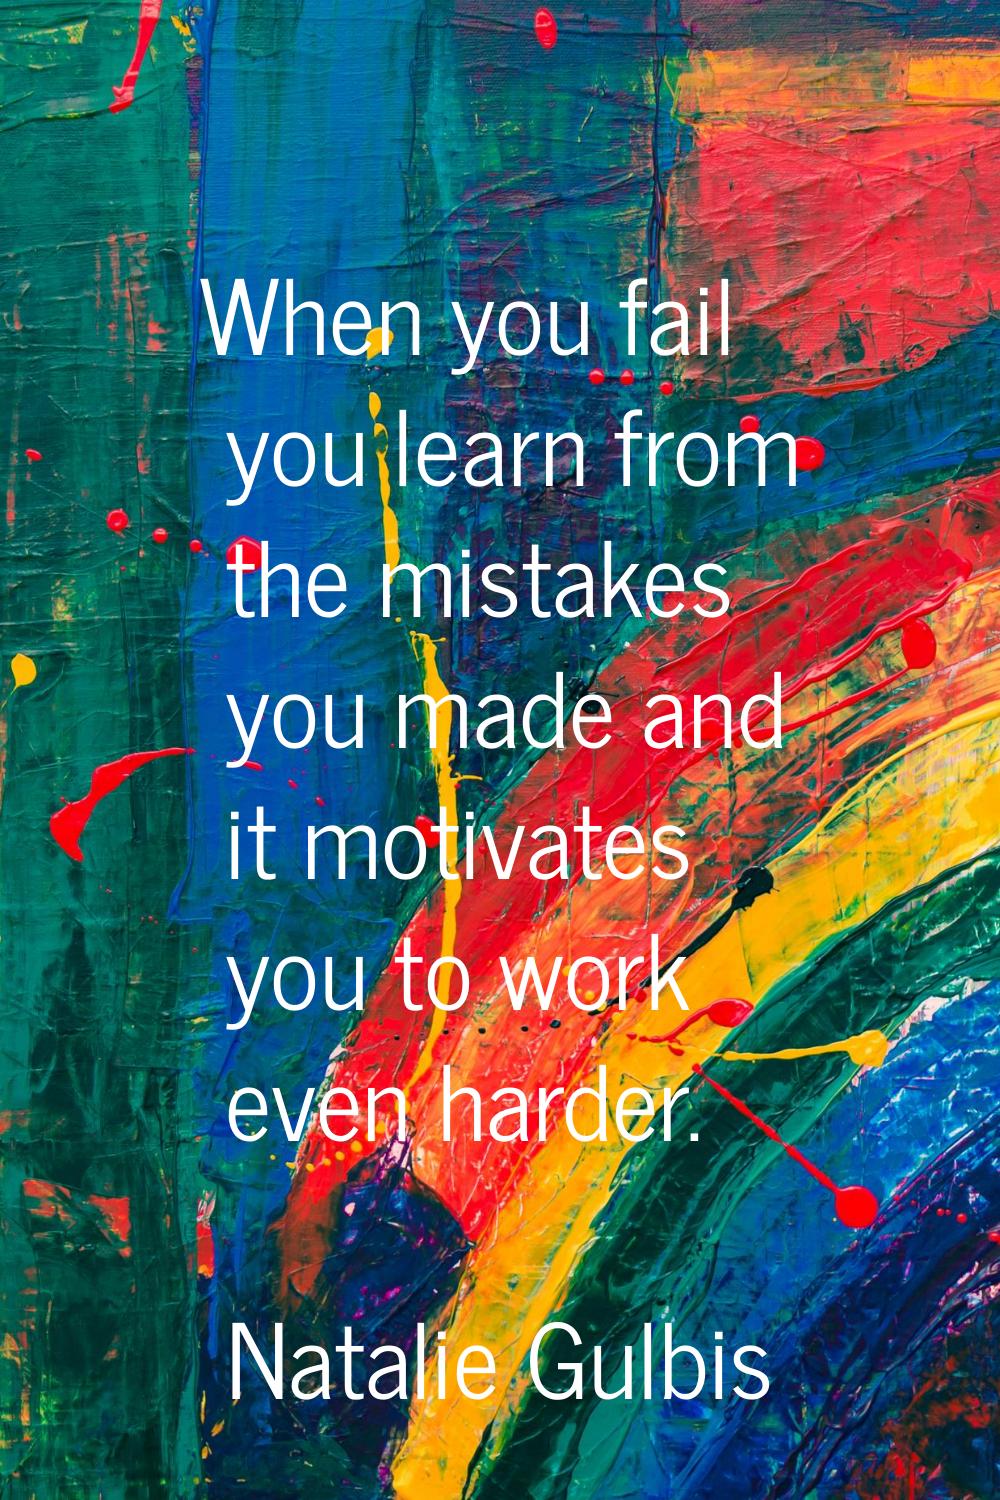 When you fail you learn from the mistakes you made and it motivates you to work even harder.